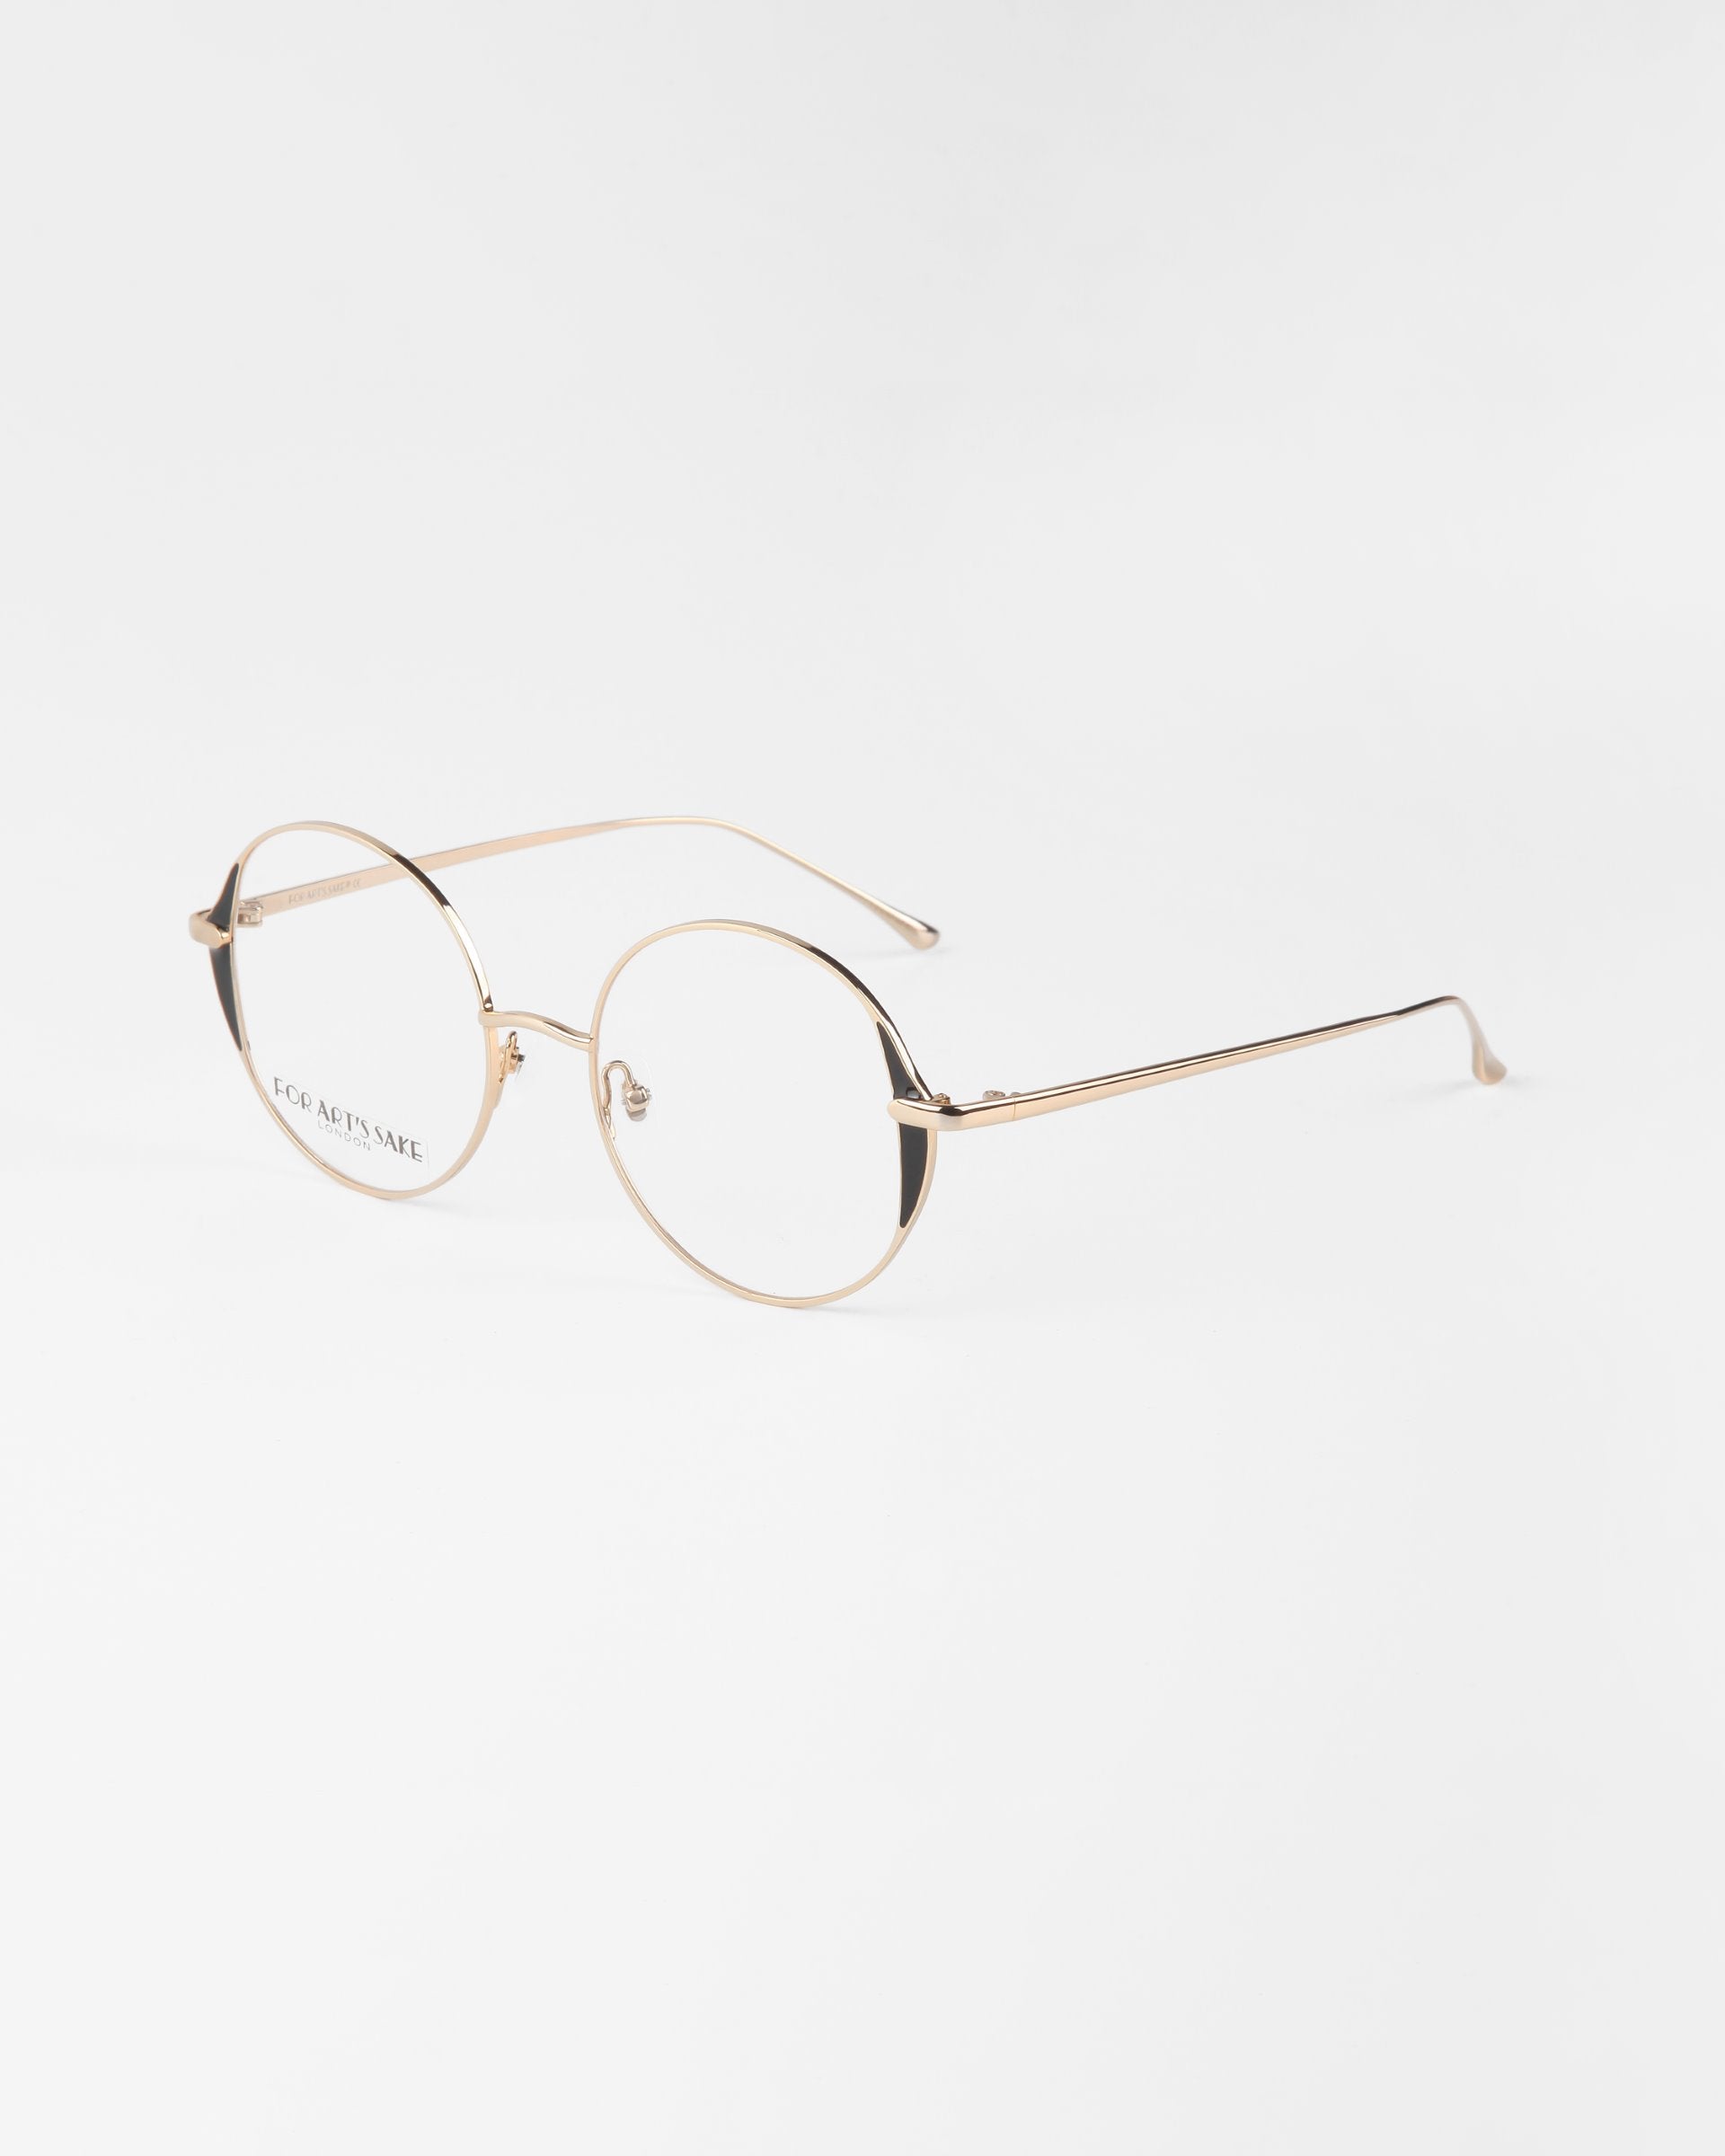 A pair of round, gold-rimmed eyeglasses with thin metal frames and clear lenses on a white background. The delicate design, featuring 18-karat gold plating, includes slim temples and bridge, giving the glasses a minimalist and elegant appearance. These are the Kos eyeglasses by For Art&#39;s Sake®.